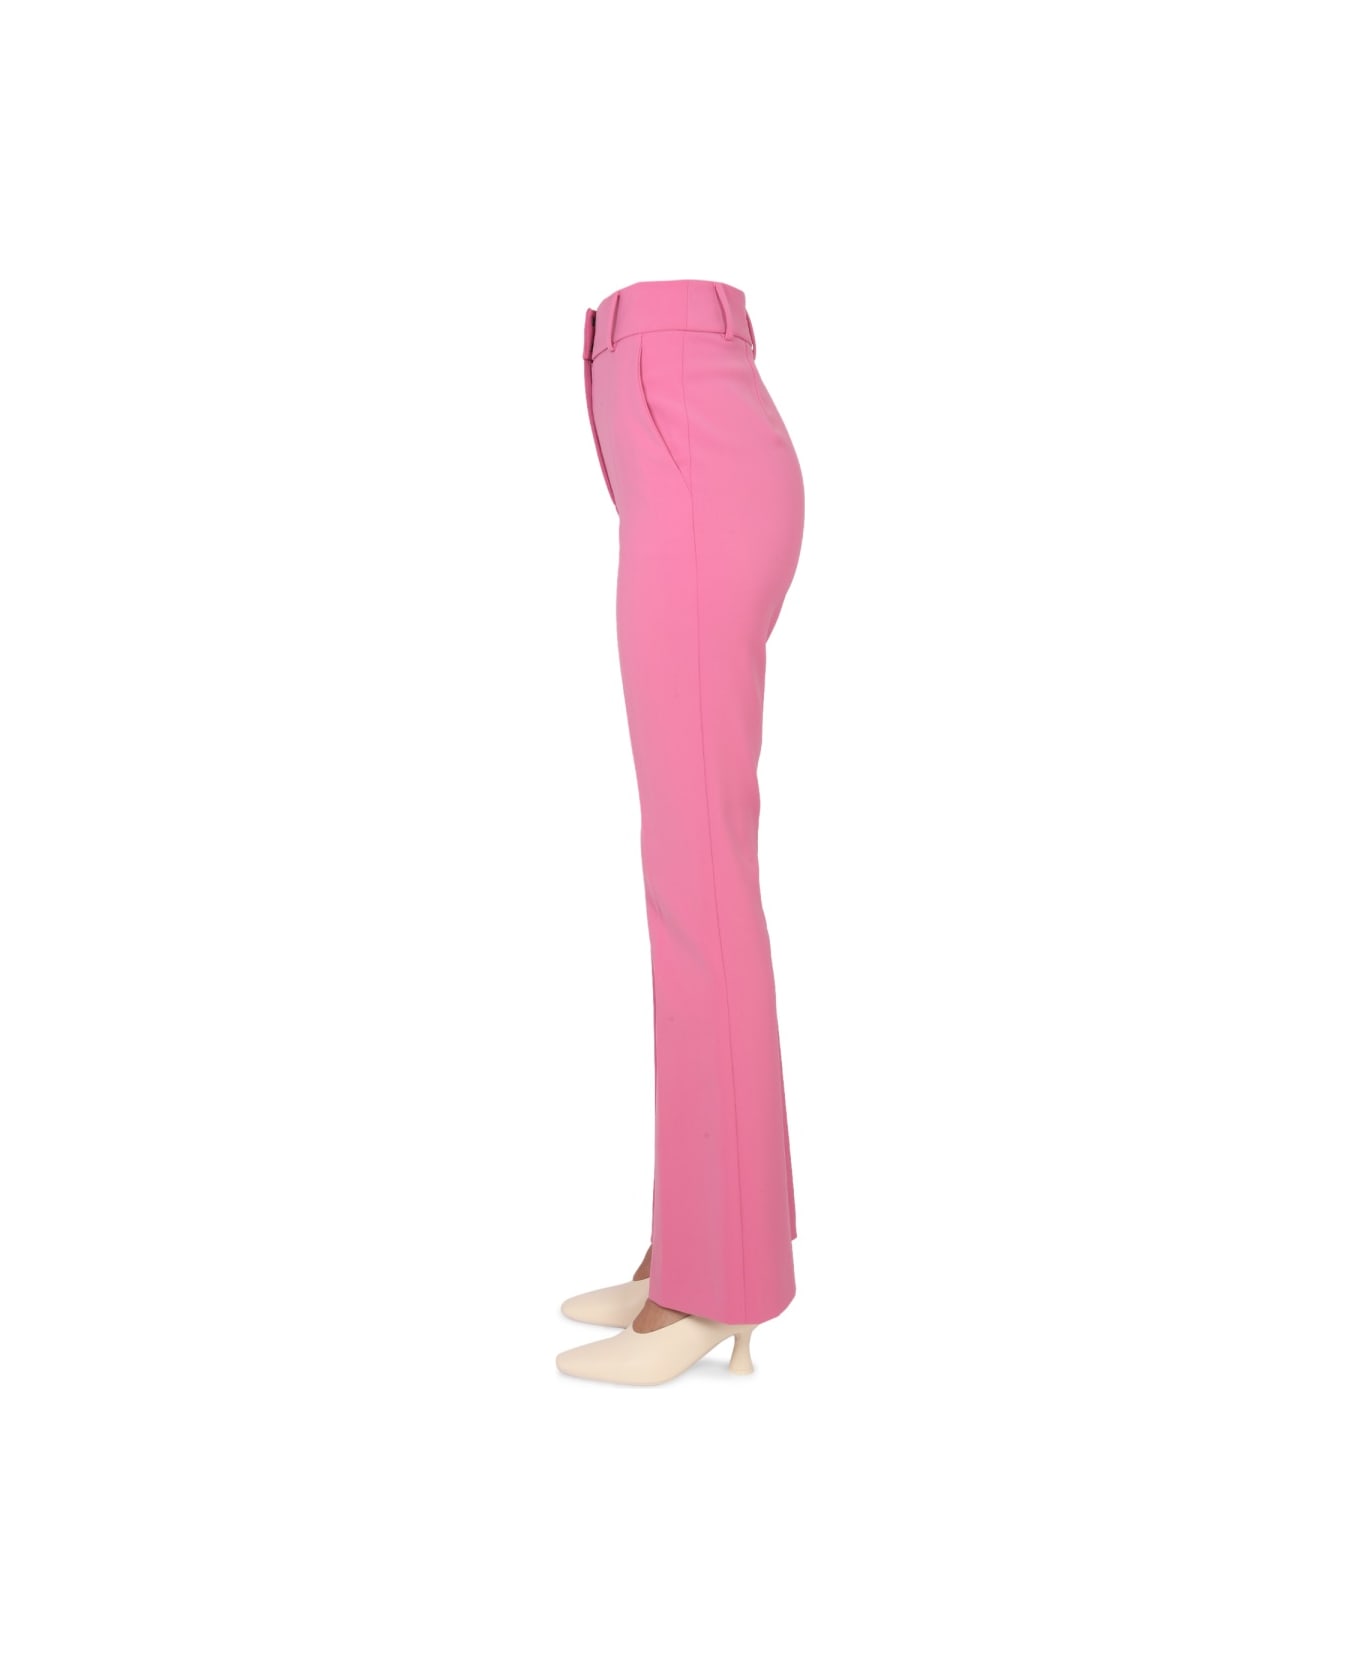 Boutique Moschino Cady Pants - PINK ボトムス